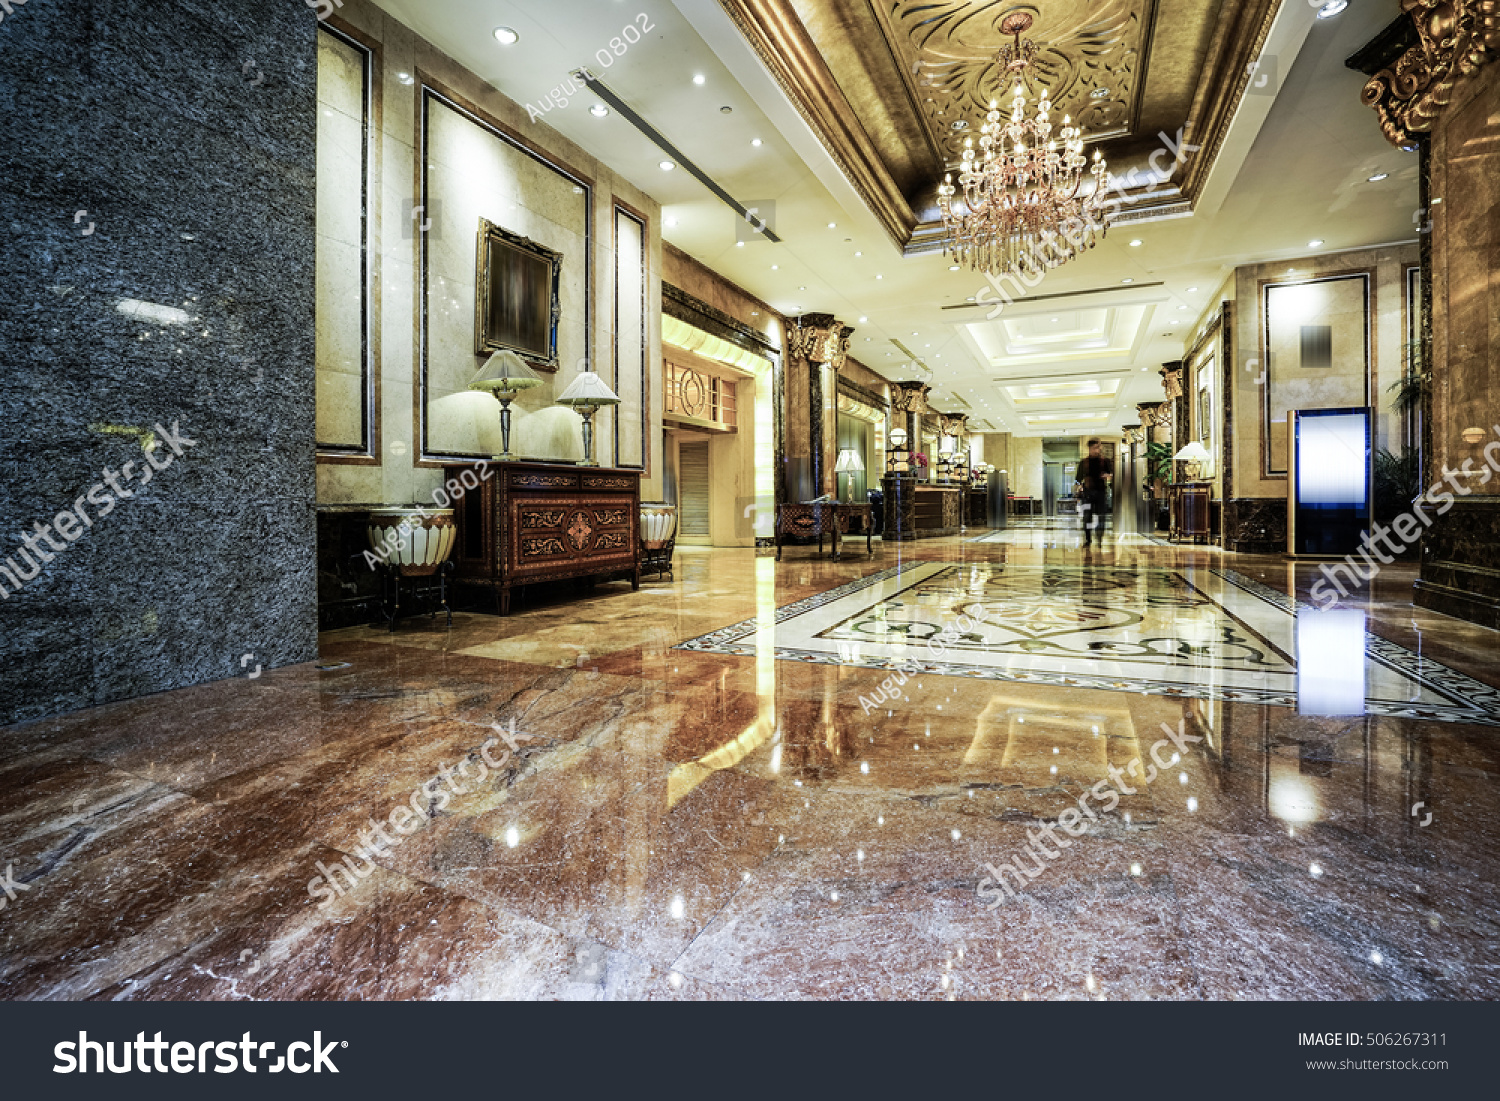 Edit Images Free Online Hotel Lobby Shutterstock Editor